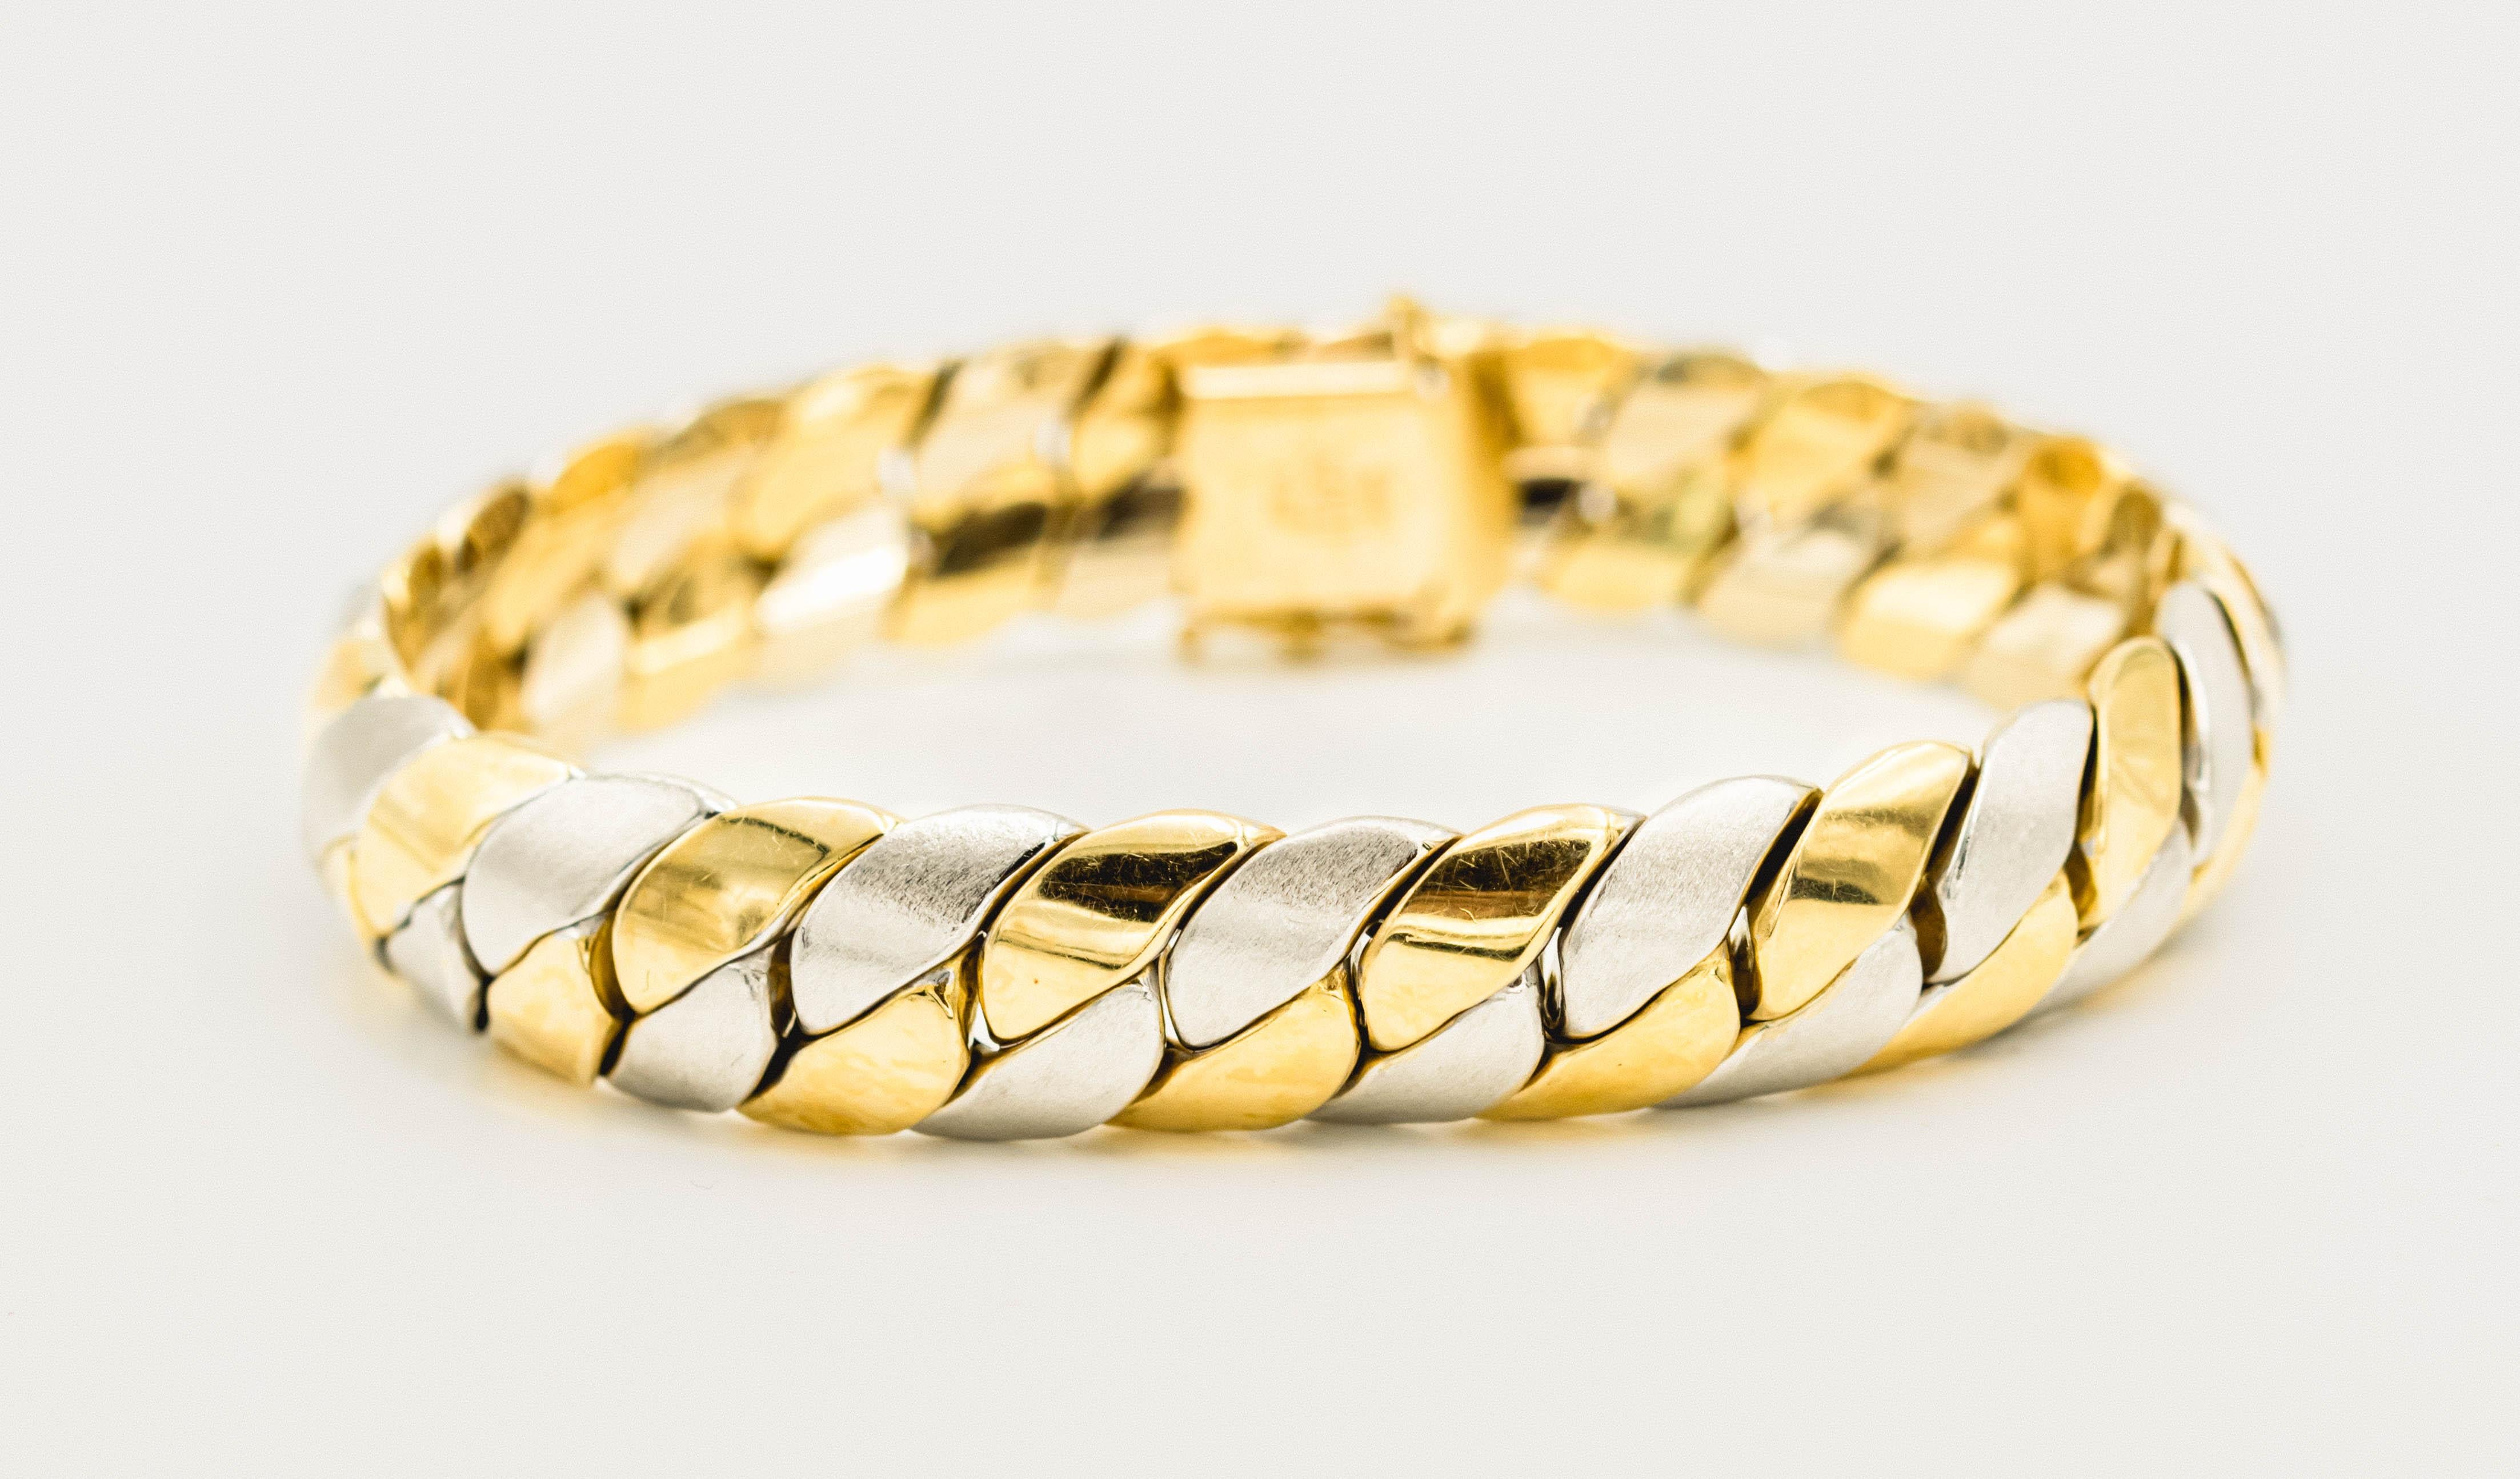 Two Tone Yellow and White Gold Italian Braid Necklace & Bracelet Suite In Good Condition For Sale In Miami Beach, FL